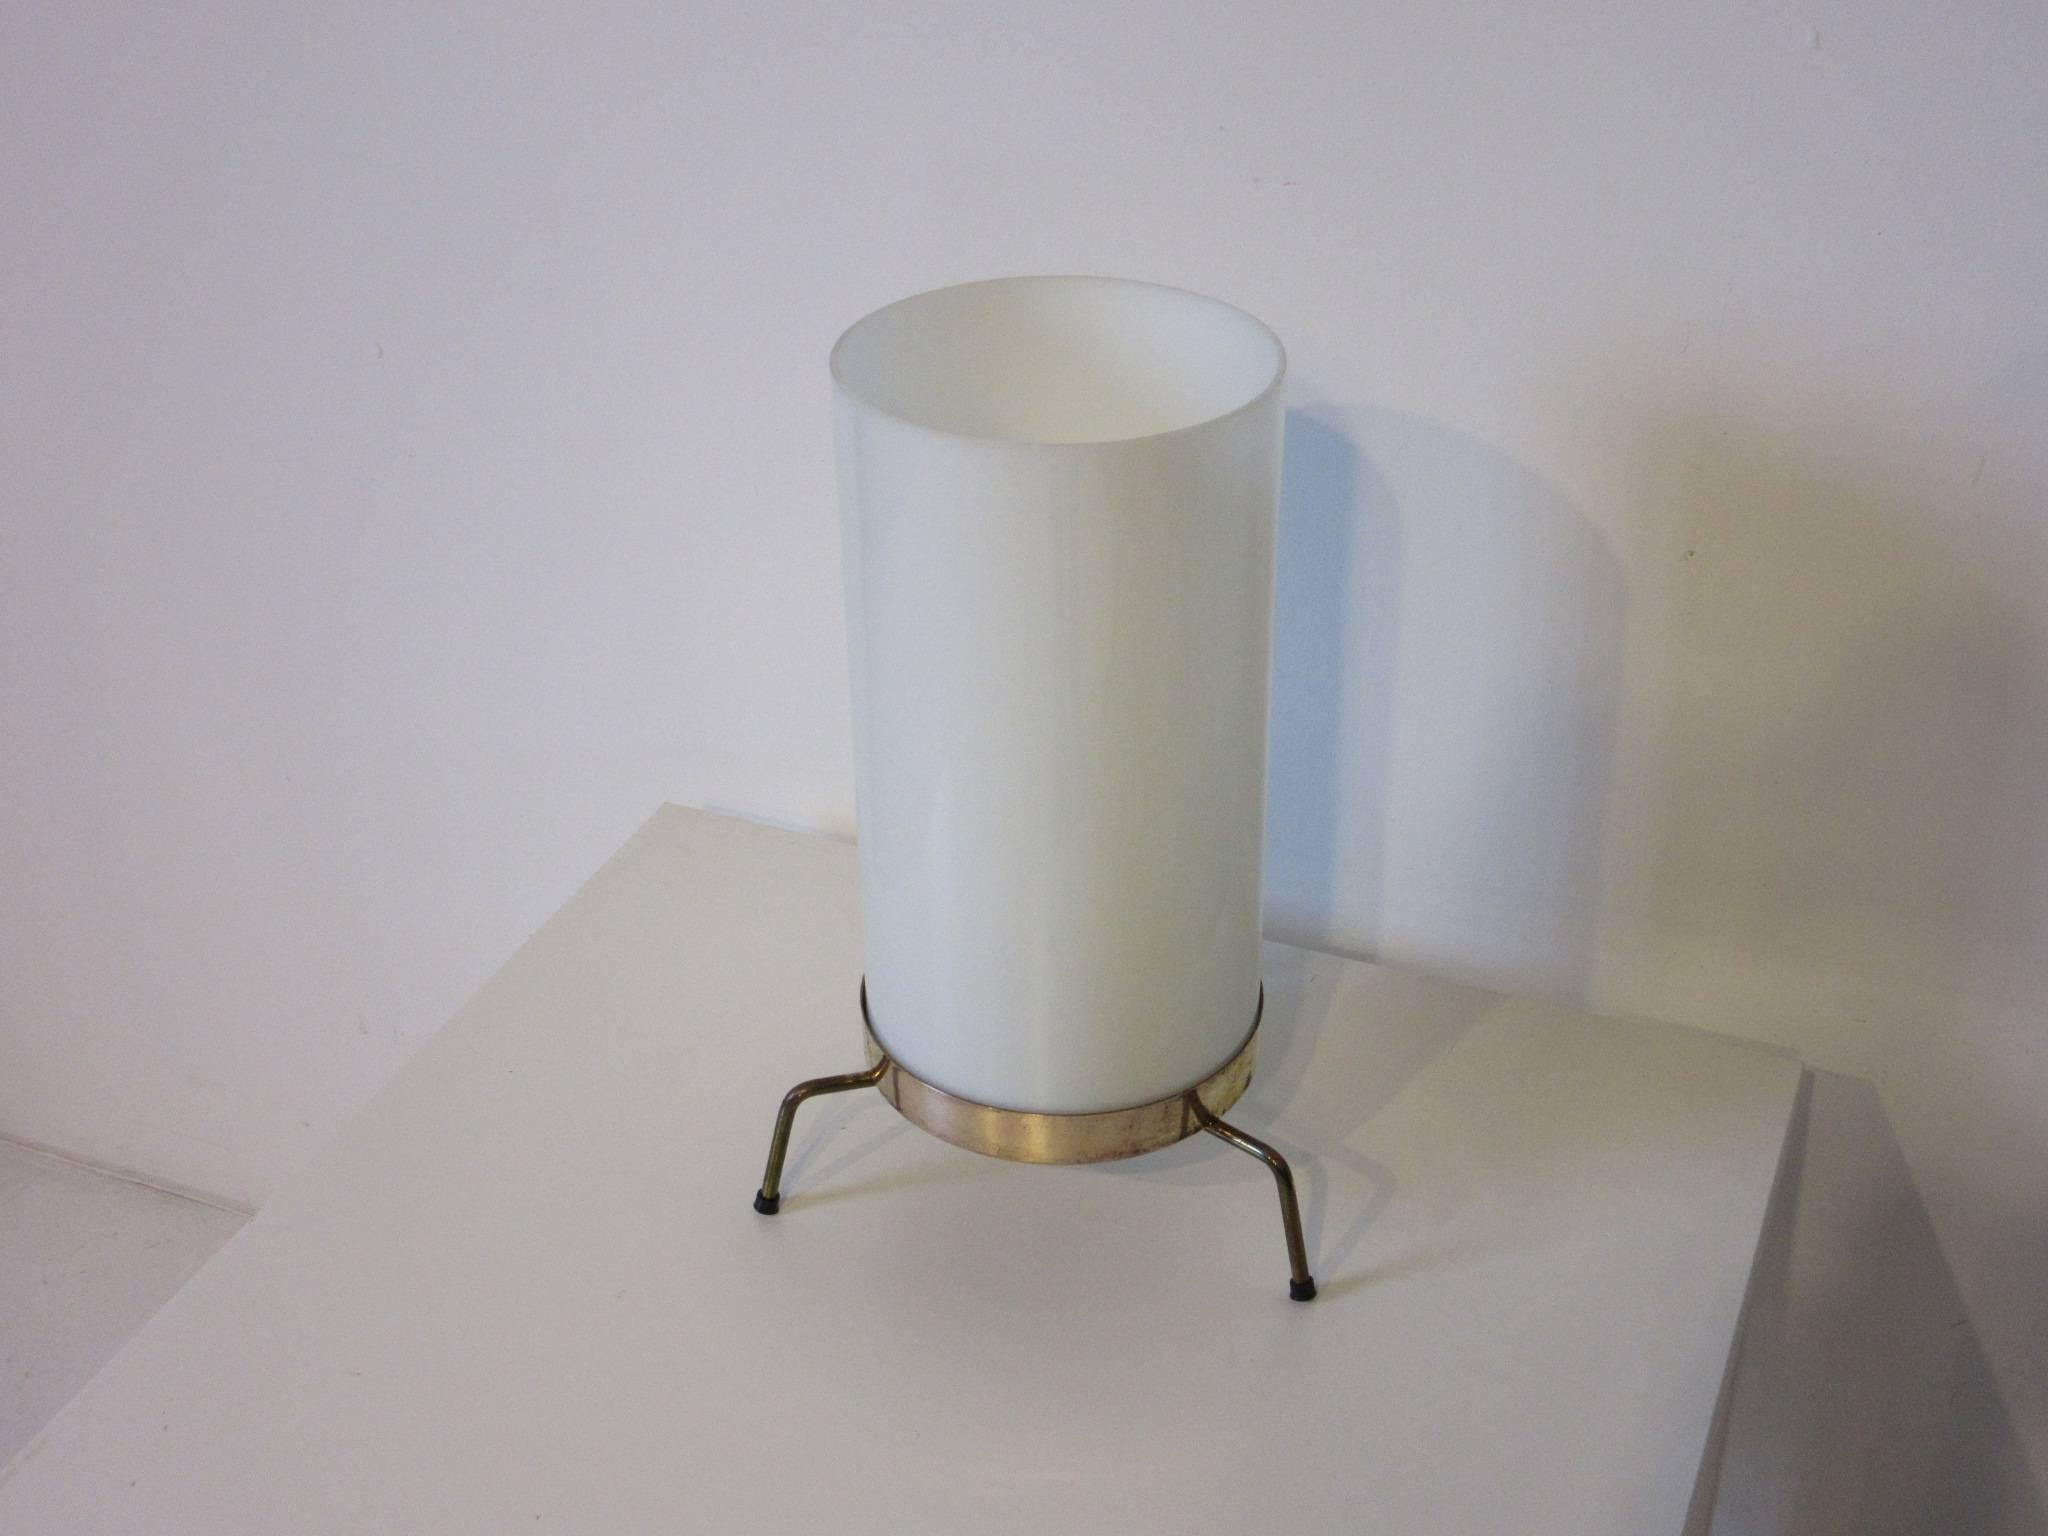 A Paul McCobb table lamp with barrel styled white translucent glass shade sitting on a tri - legged brass base with bottom turn switch. Manufactured by the Northcraft Lamp & Accessories Company model # 2005.